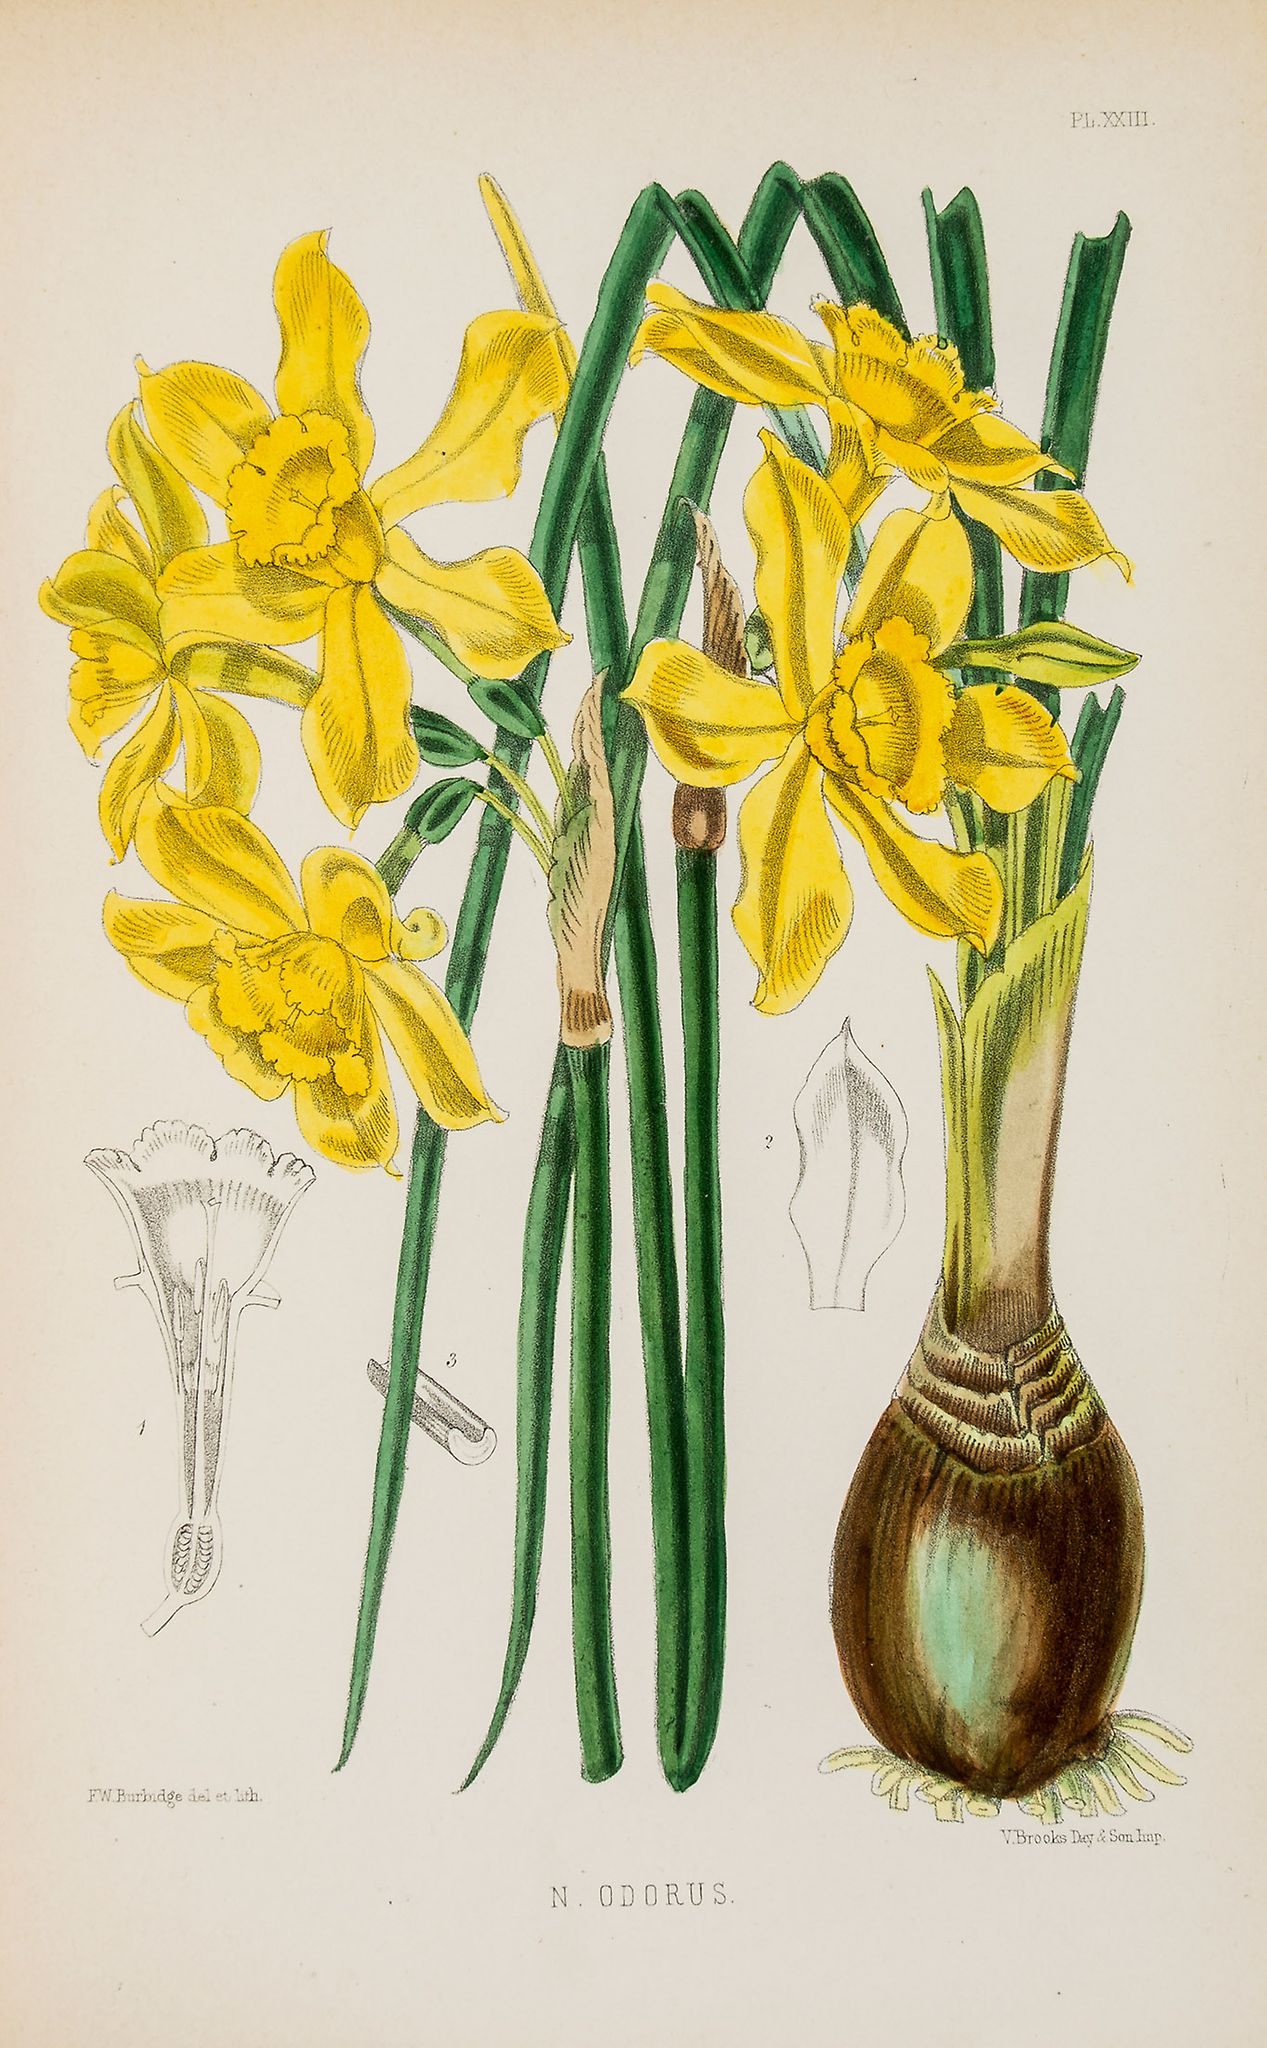 Burbidge (F.W.) - The Narcissus,  hand-coloured lithographed plates,   1875 § Baker (J.G.)